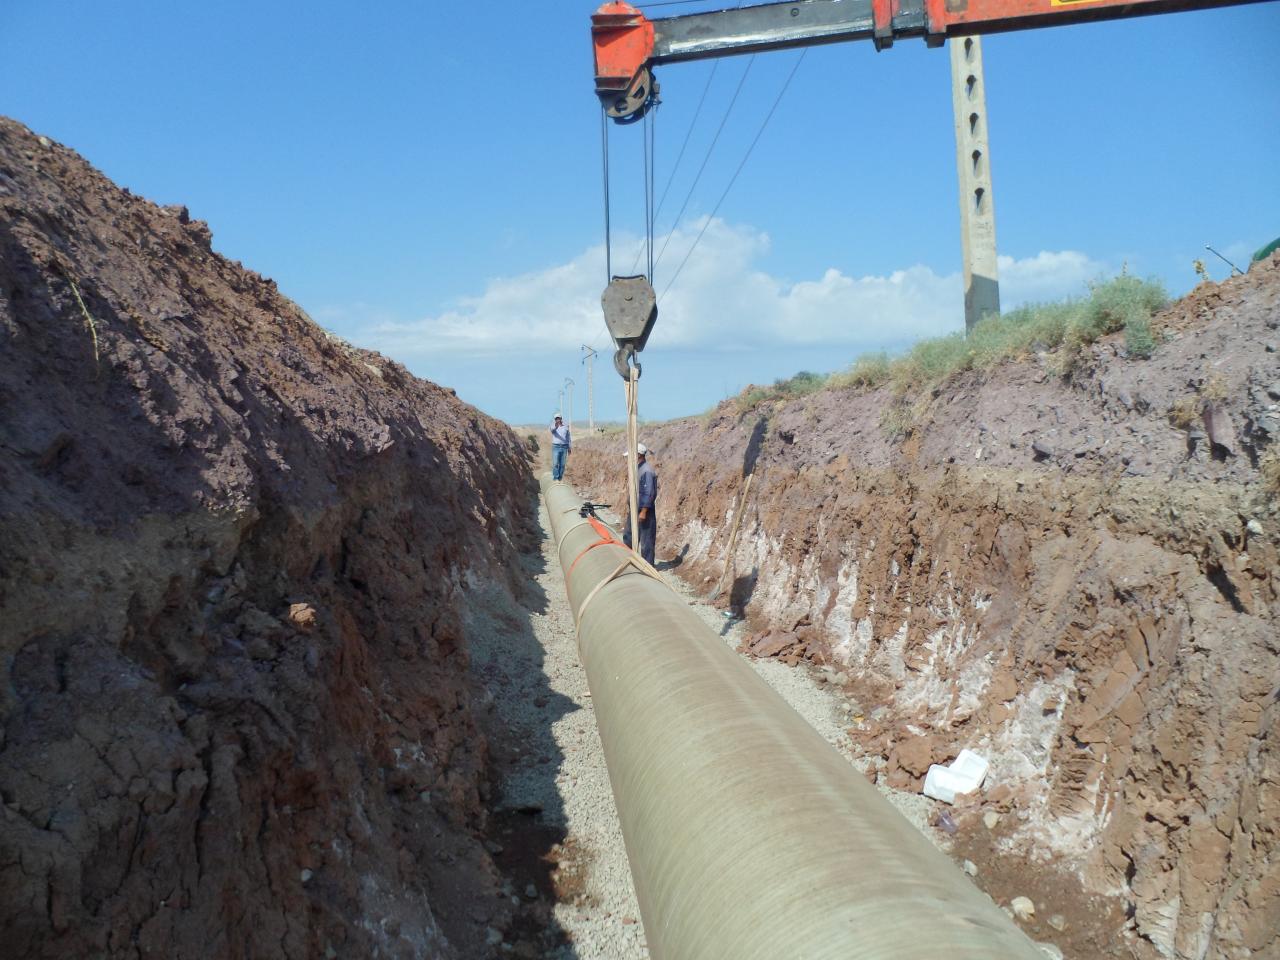 Implementation of second part of RMC canal and the main pipelines of civil areas of Agh Chay plan